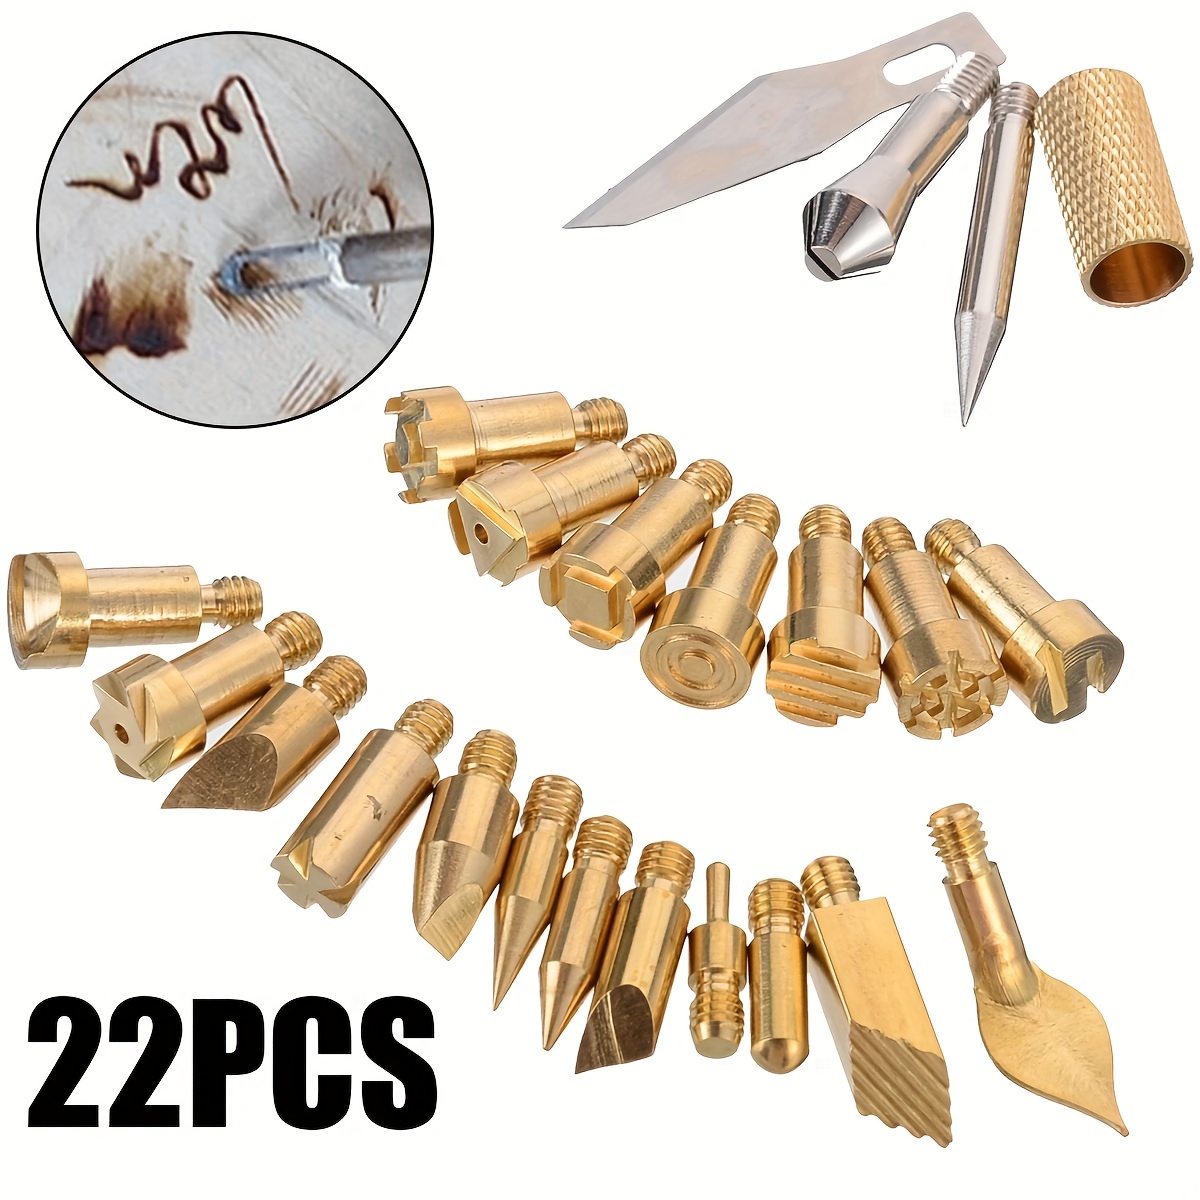 

22pcs Wood Burning Pen Tip Craft Set Iron Carving Pyrography Tool Art Soldering Pen Brass Welding Tips For Wood Embossing